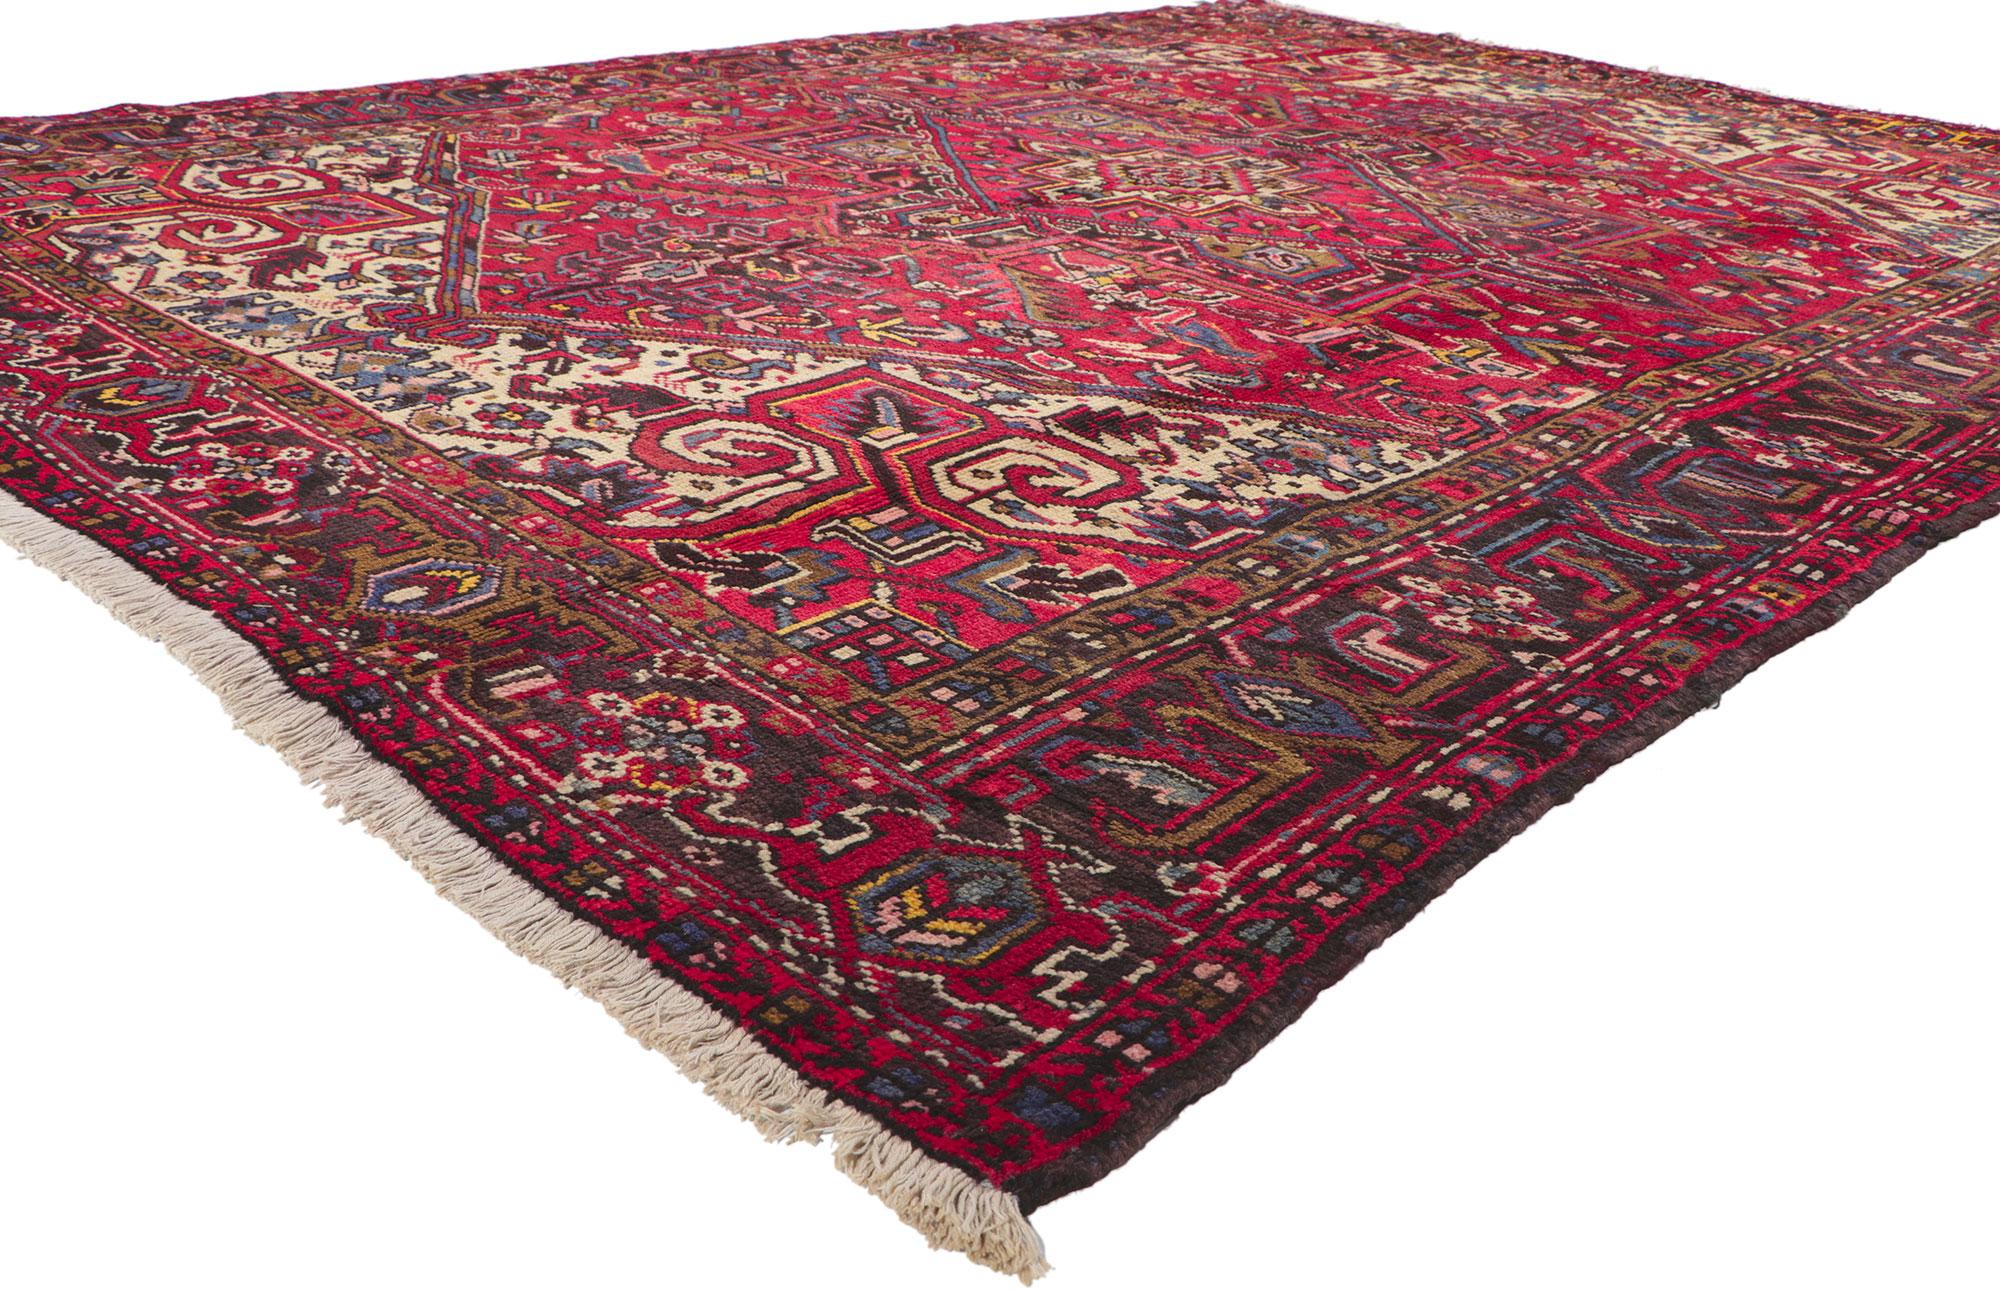 ?76246 Vintage Persian Heriz Rug, 07'07 X 09'11.
Emanating refined elegance with incredible detail and texture, this hand-knotted wool vintage Persian Heriz rug appears like a sumptuous Italian velvet, recalling the rich and luxurious design